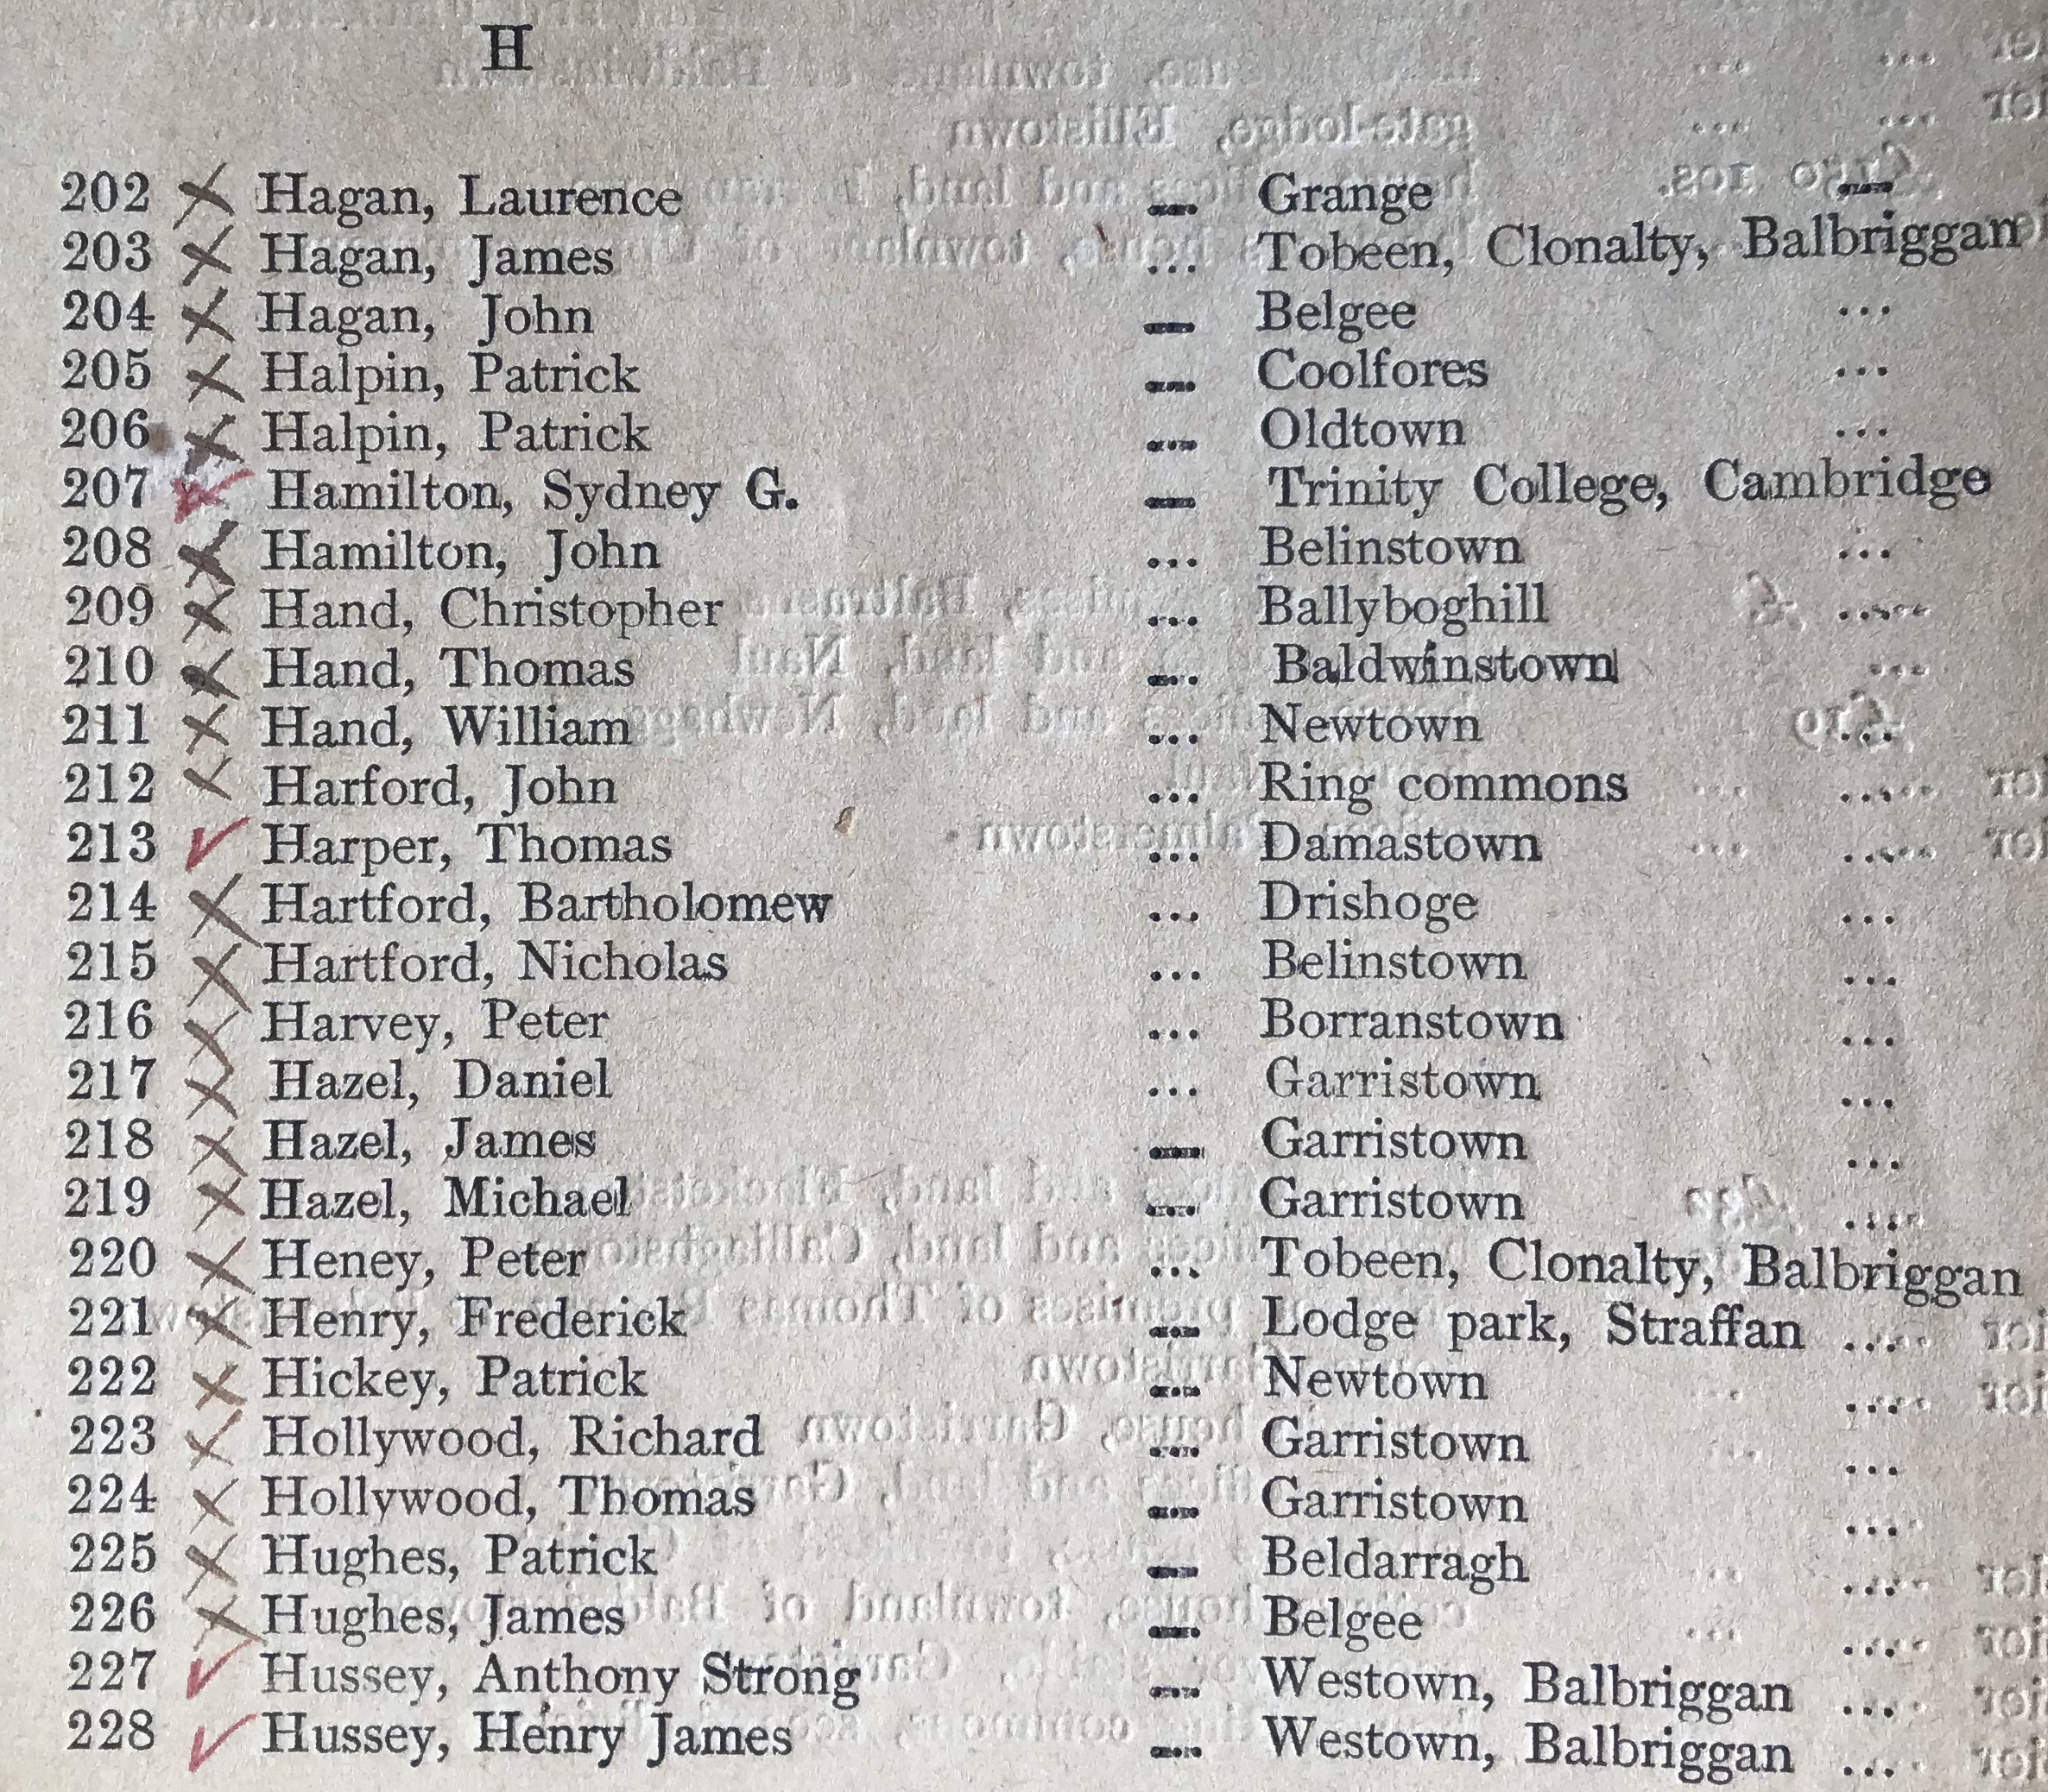 A page of the list of names as found in the item, showing the Hussey family at the bottom of the page.